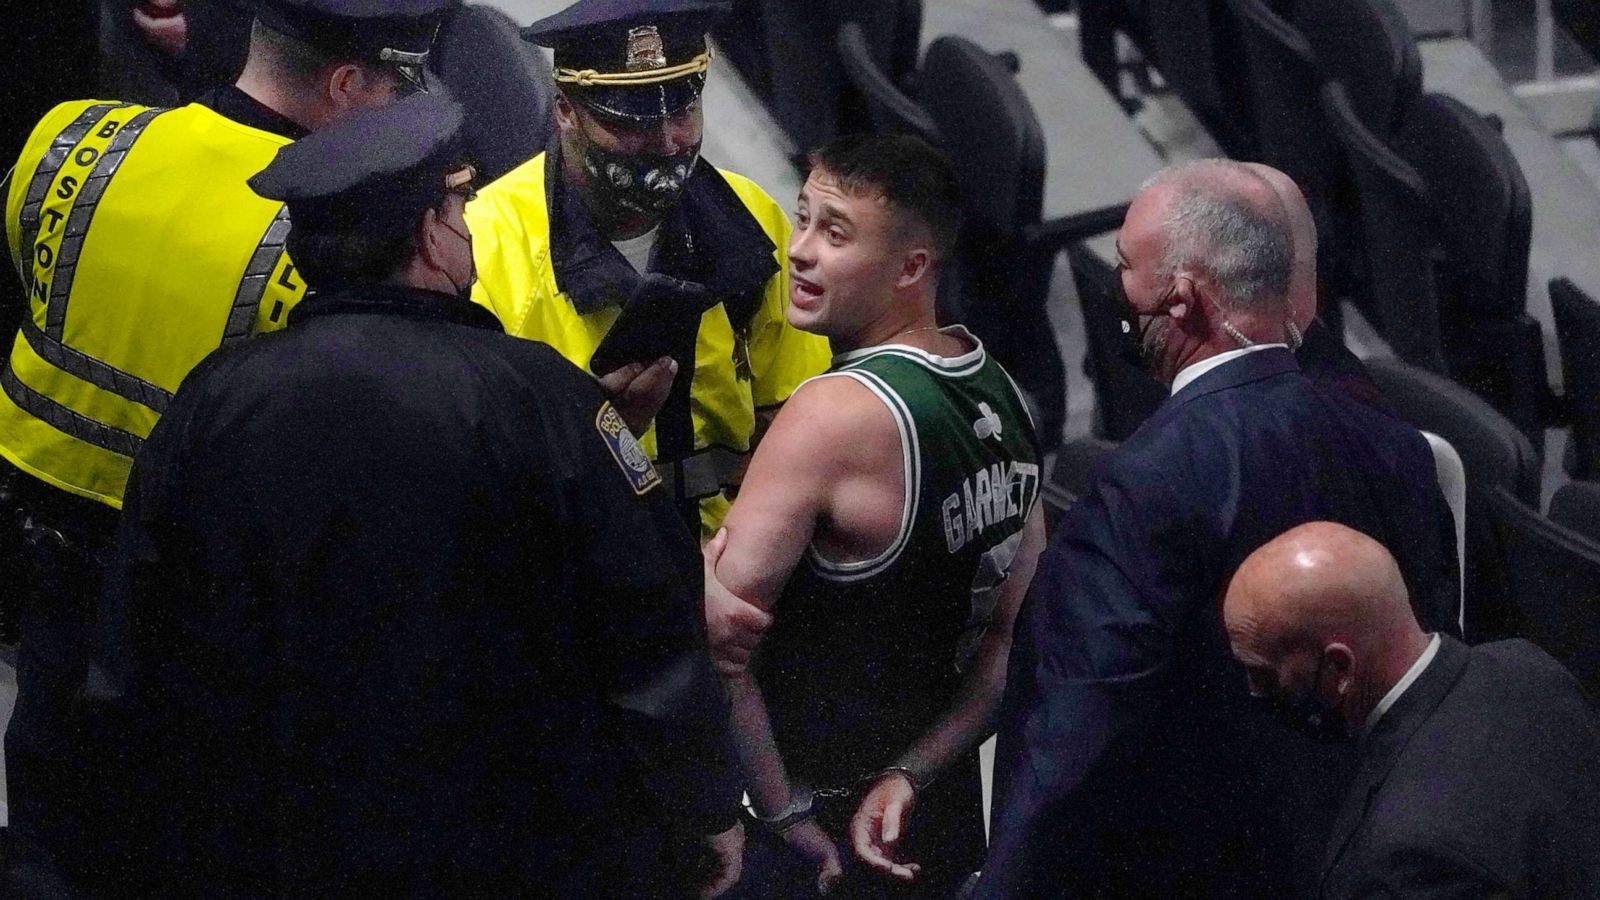 Boston prosecutor blasts NBA fan's alleged bad conduct: 'You don't get to  behave this way' - ABC News